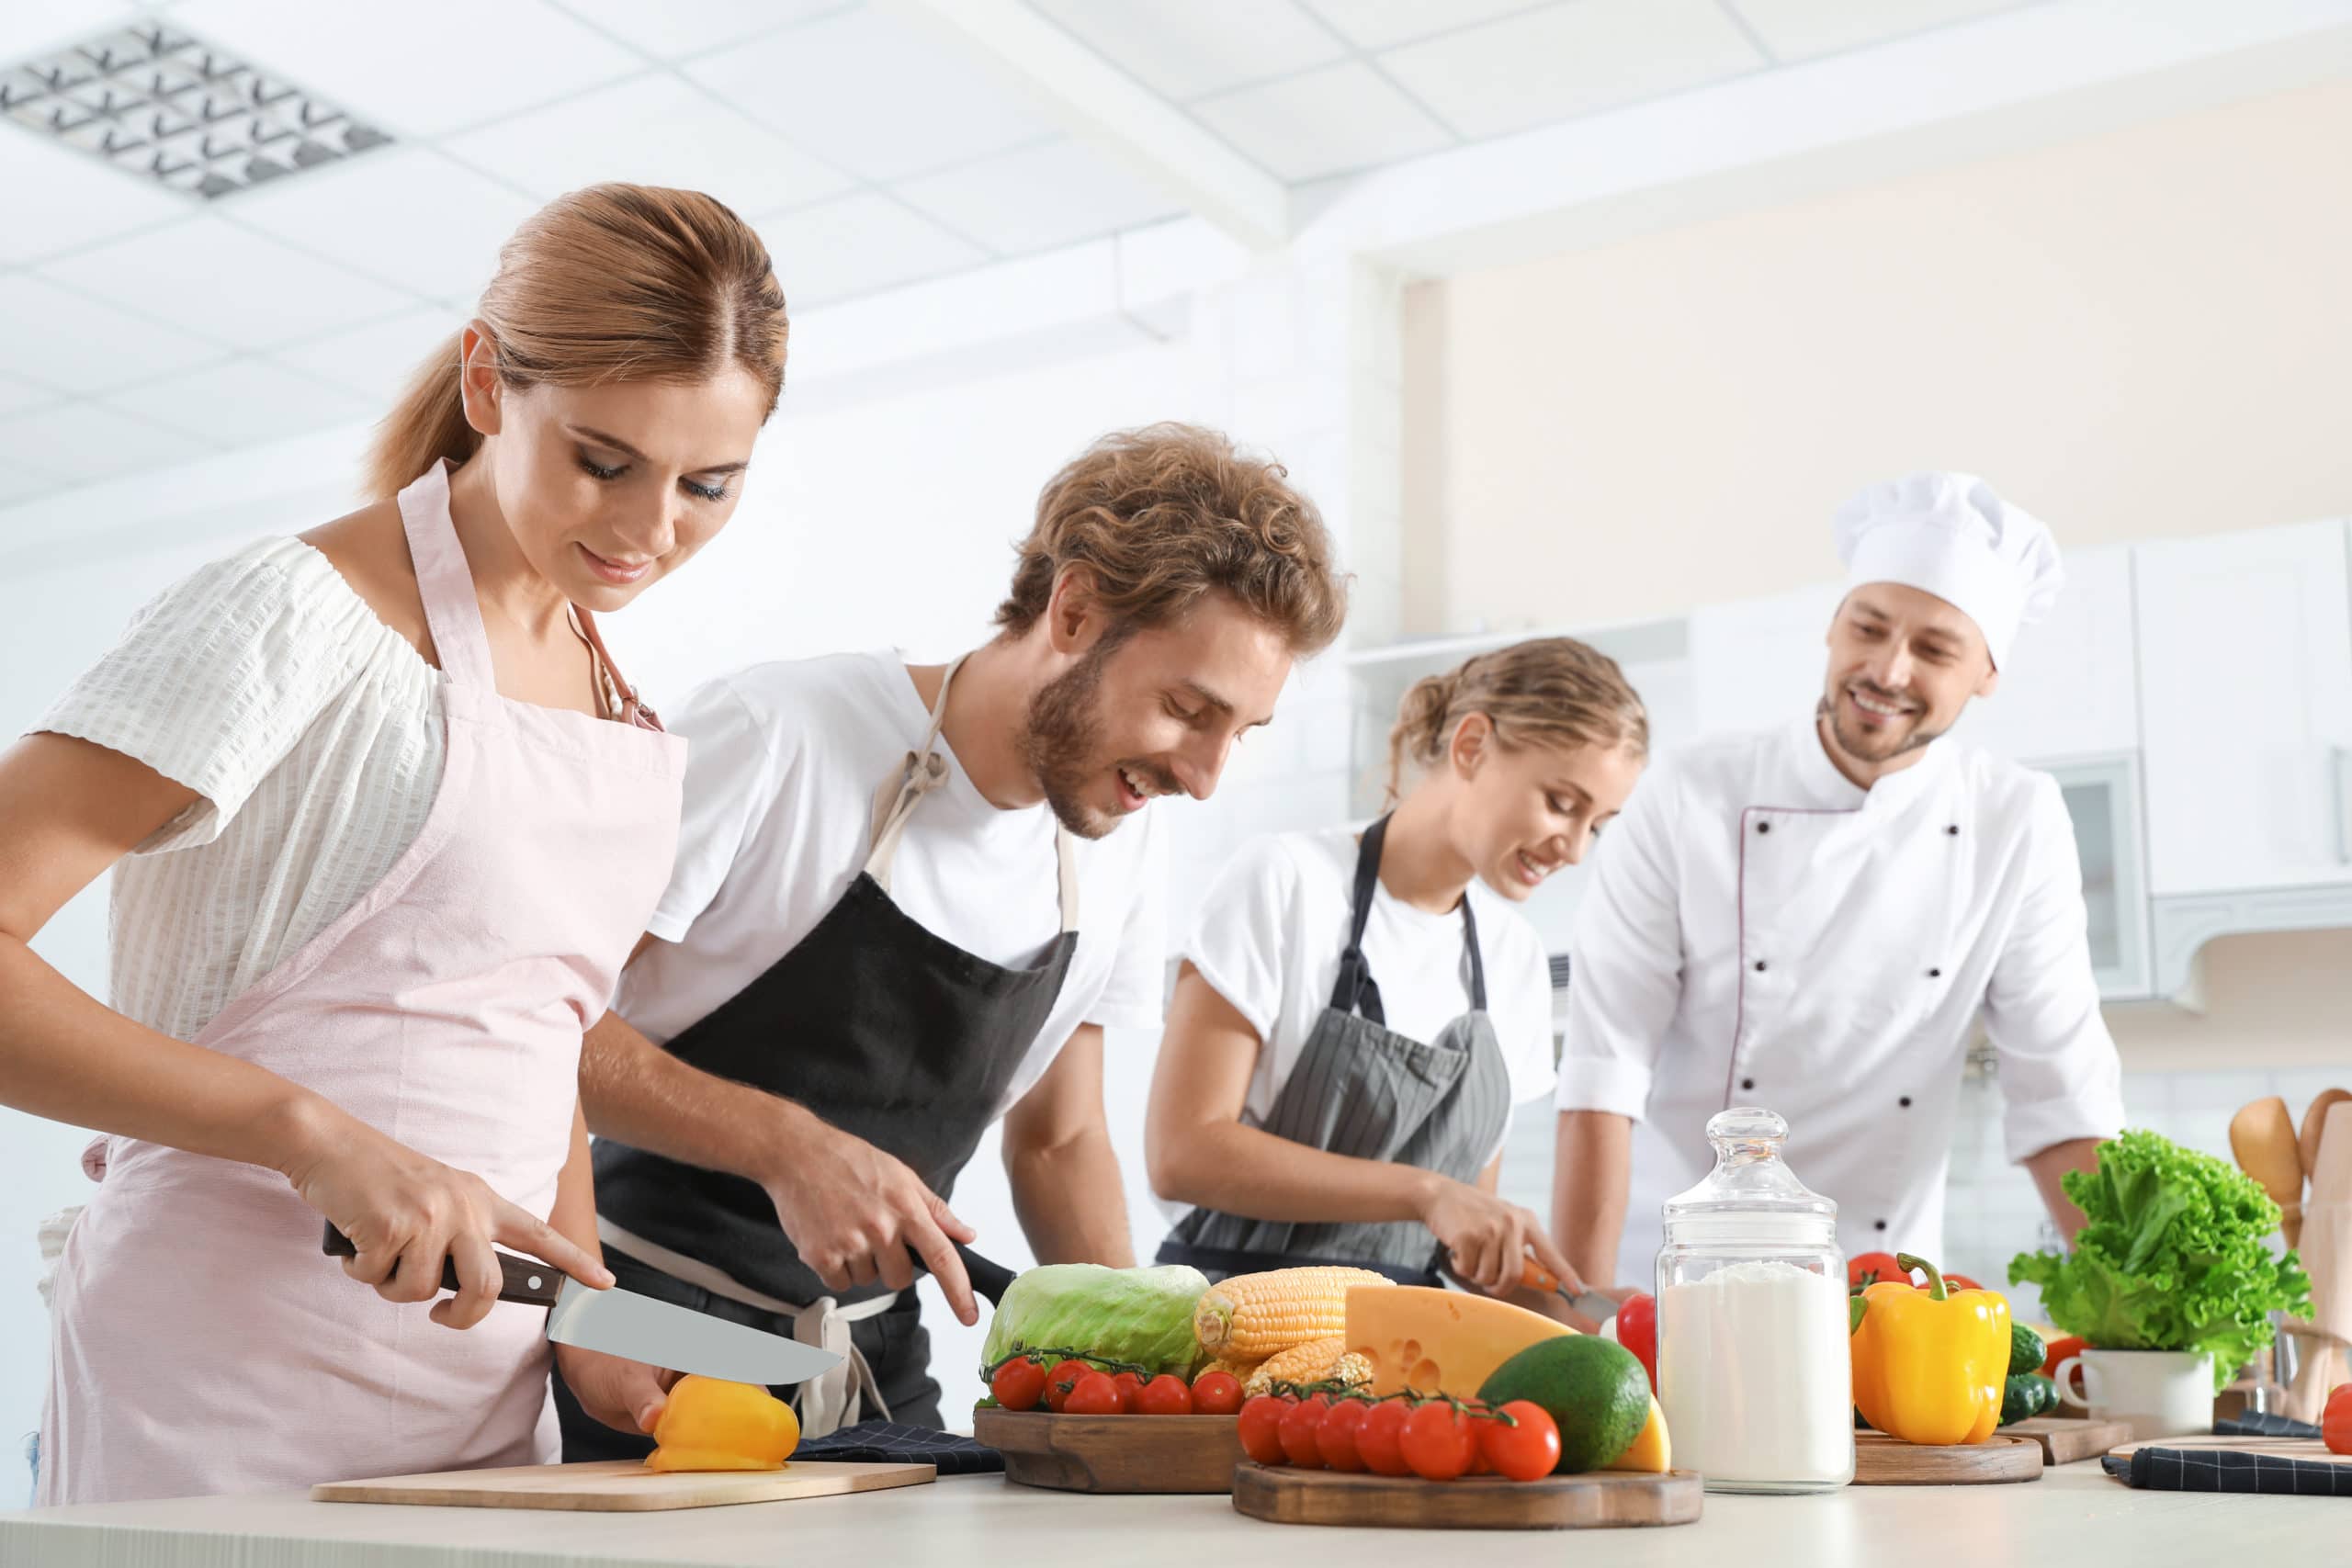 How to start cookery classes at home - Booking Live